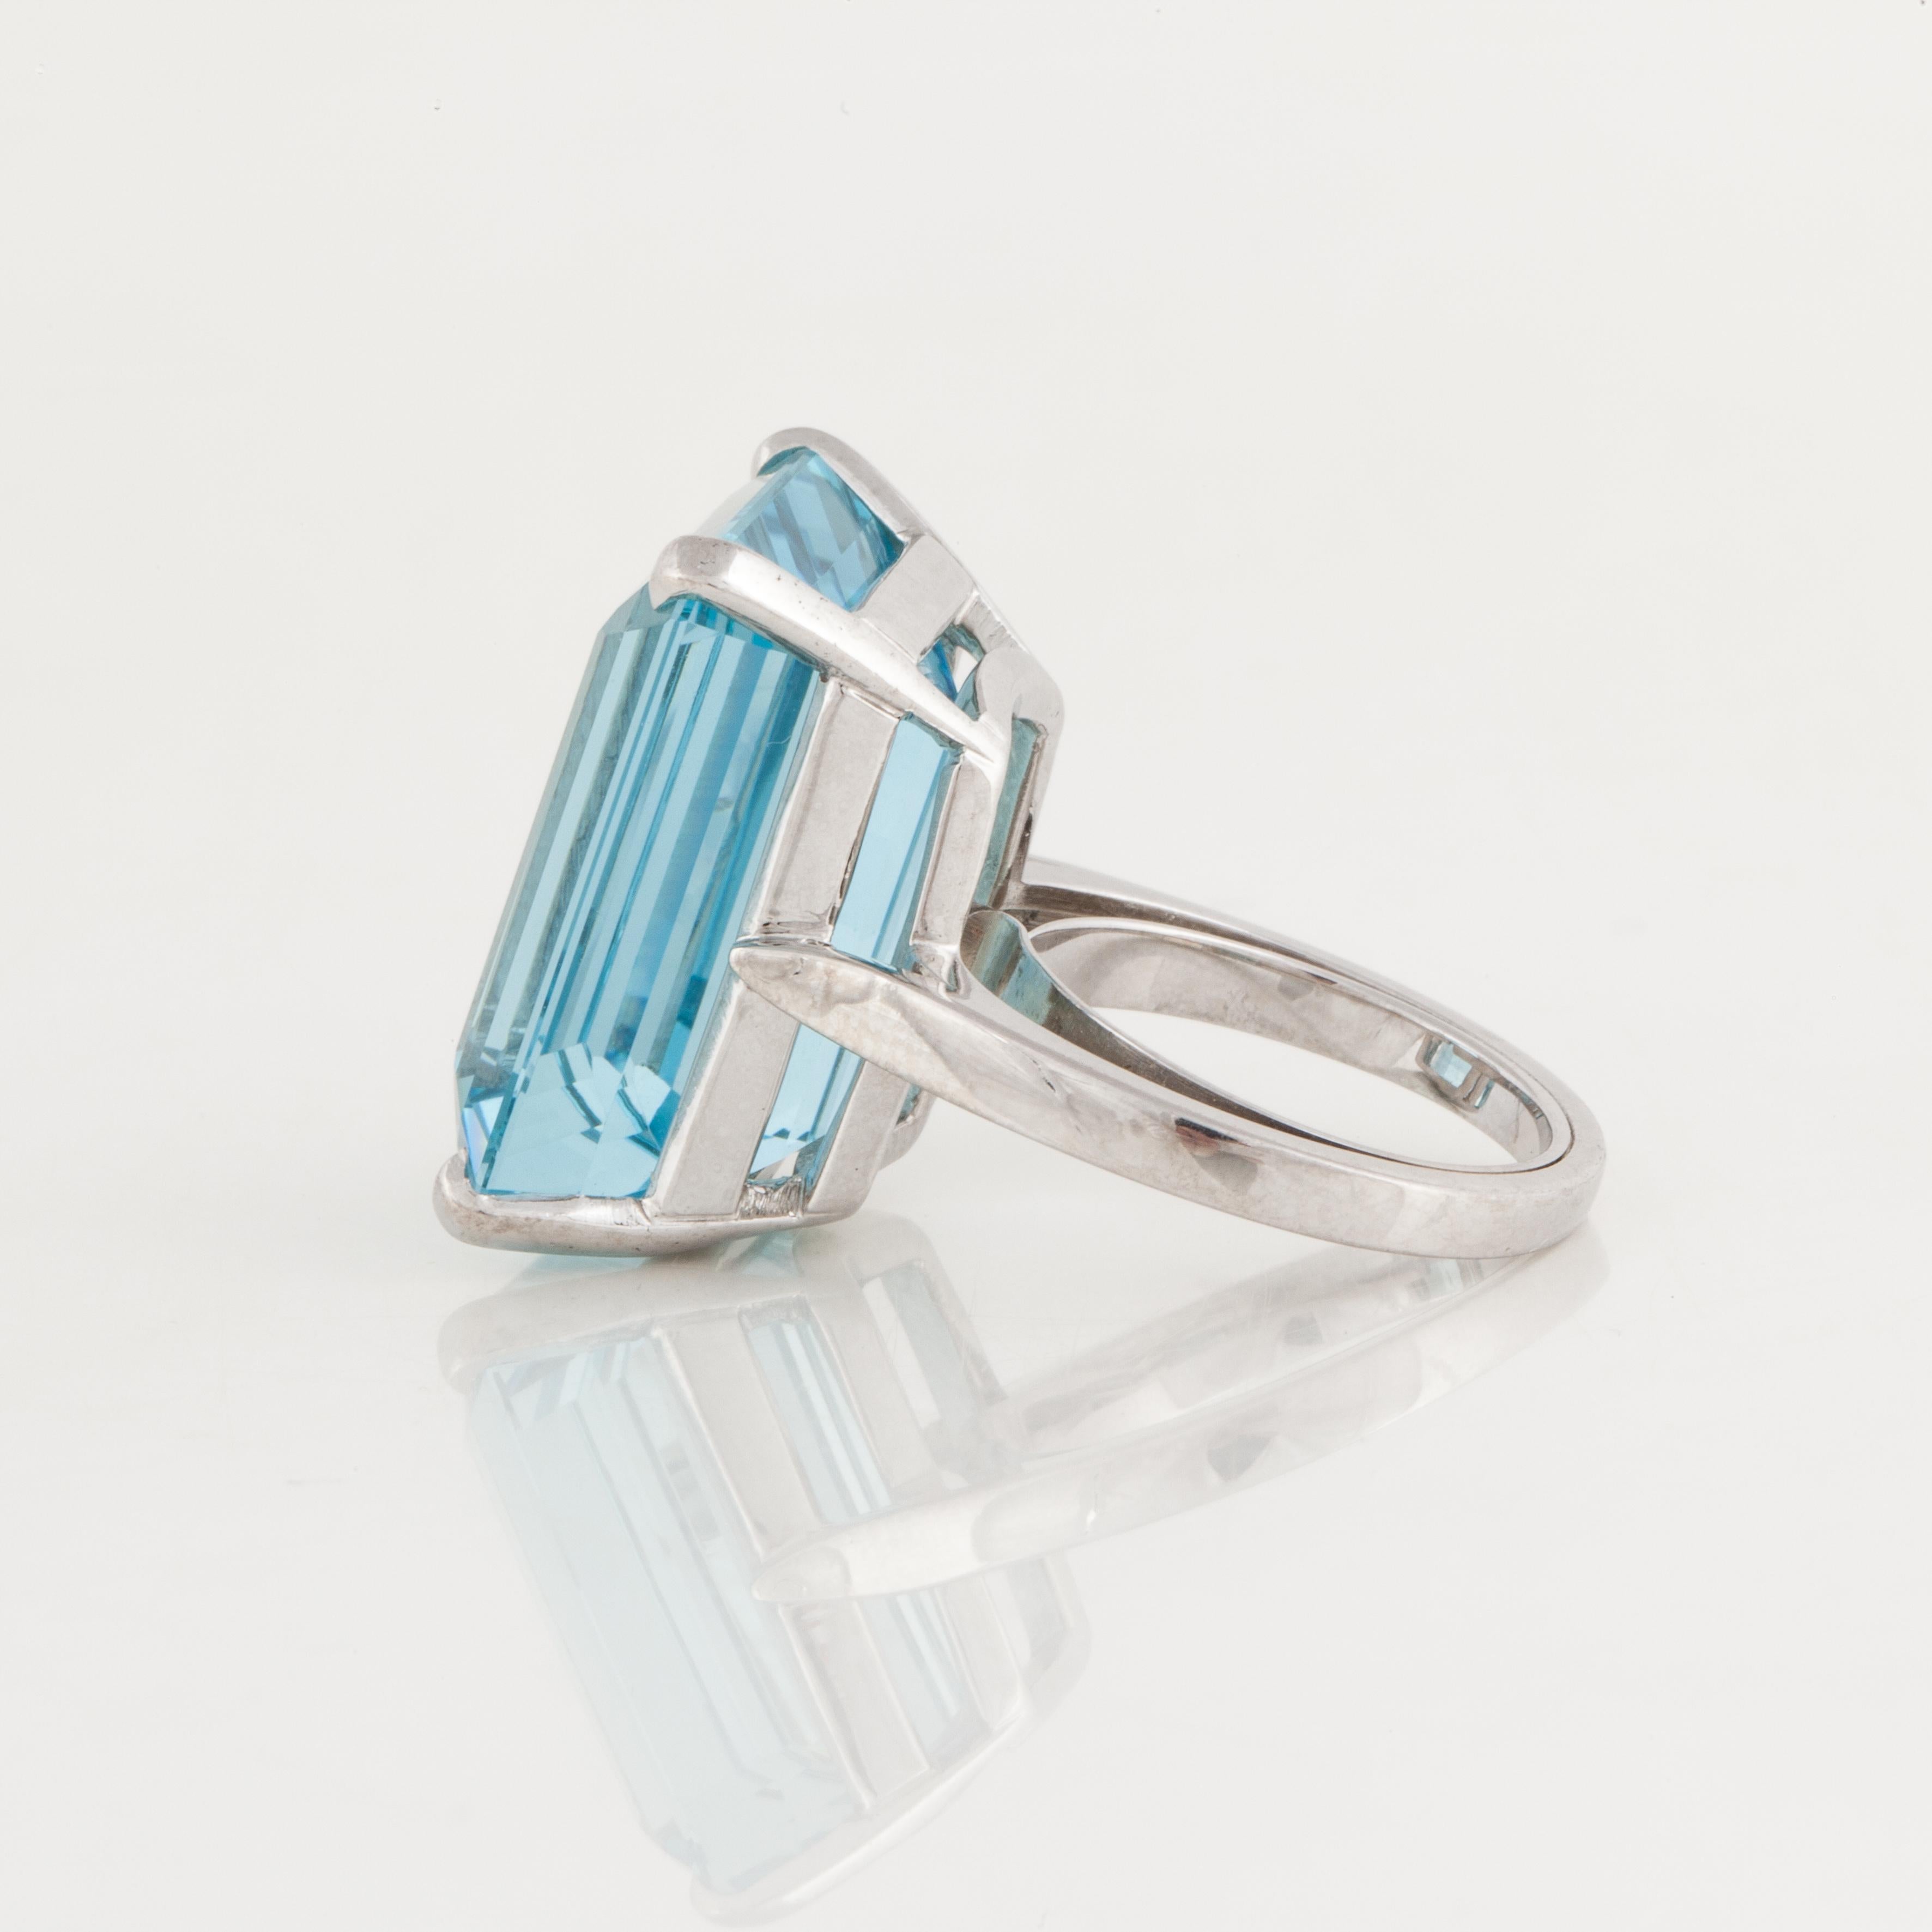 25.13 carat step-cut aquamarine ring in a simple basket mounting done in platinum. The ring measures 11/16 inches long and 3/4 inches wide, and stands 3/8 inches off the finger. 